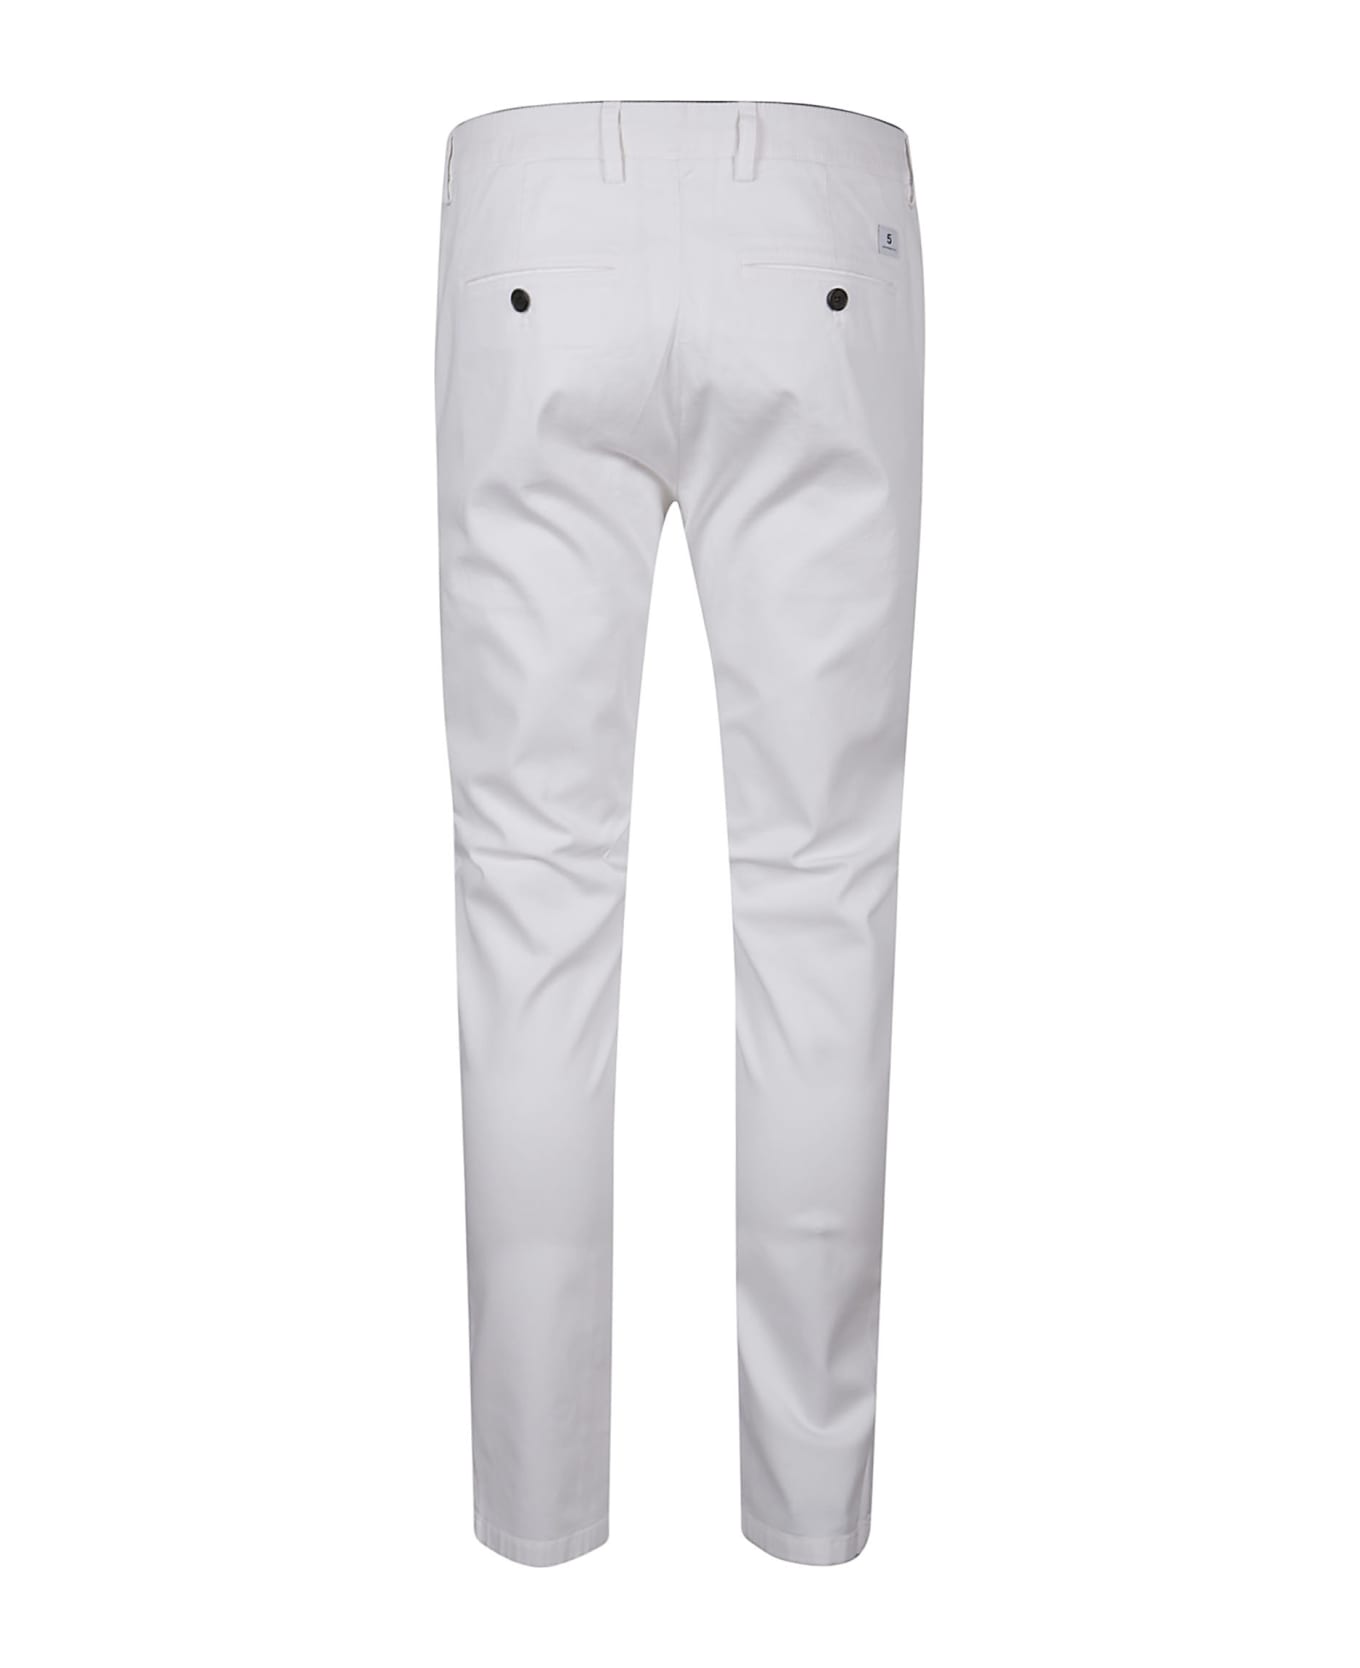 Department Five Mike Chinos Superslim Pant - Bianco Ottico ボトムス